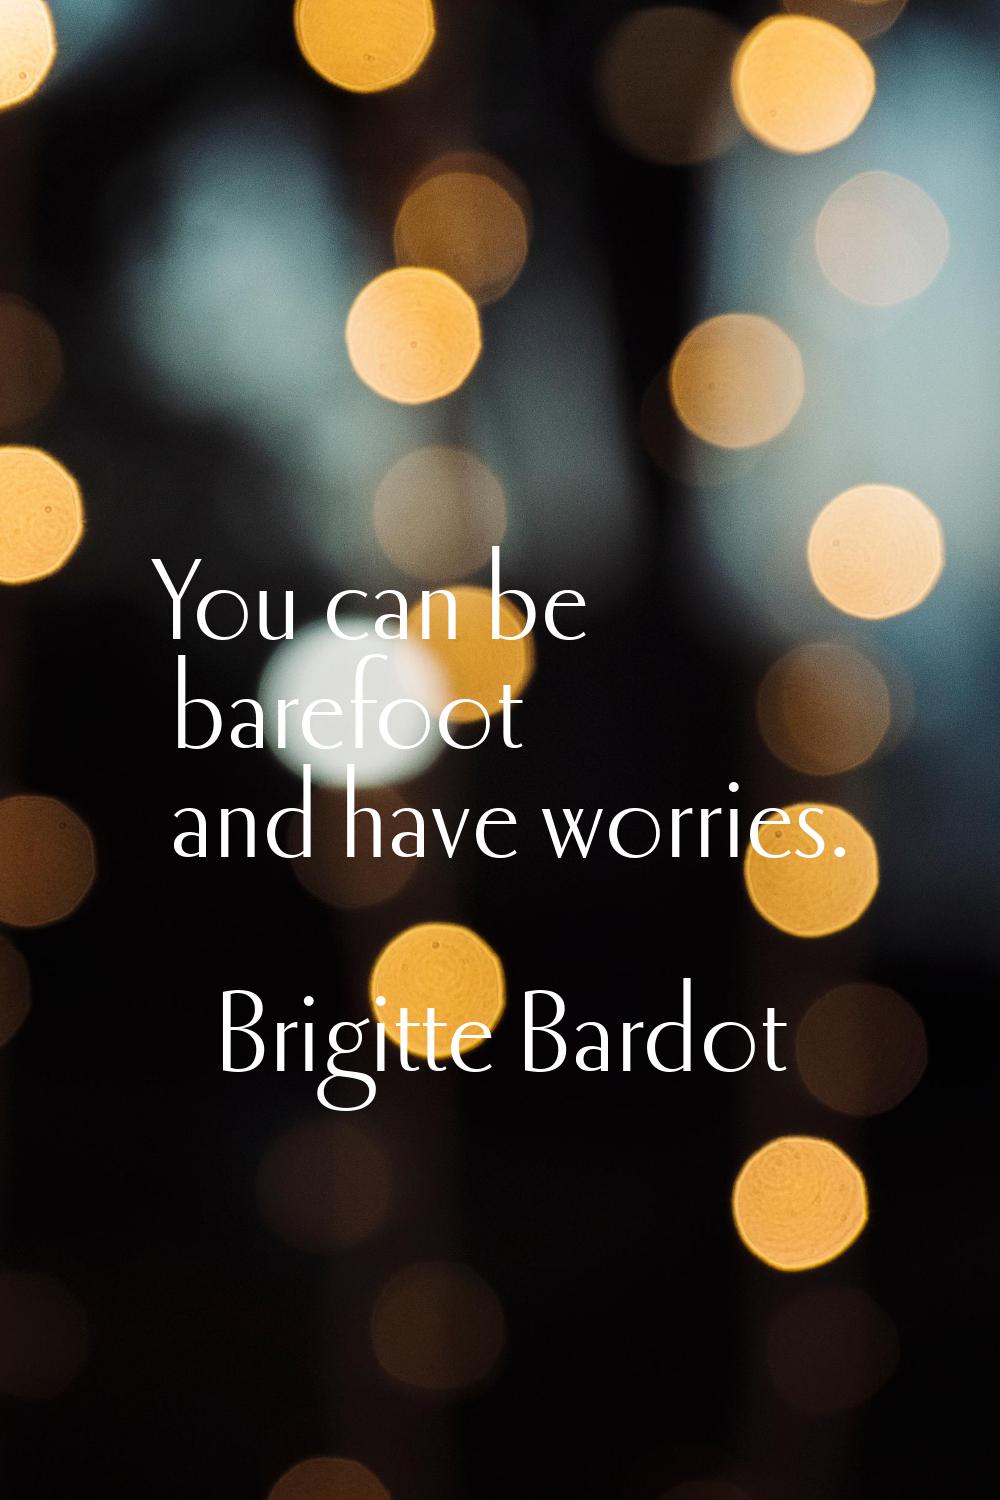 You can be barefoot and have worries.